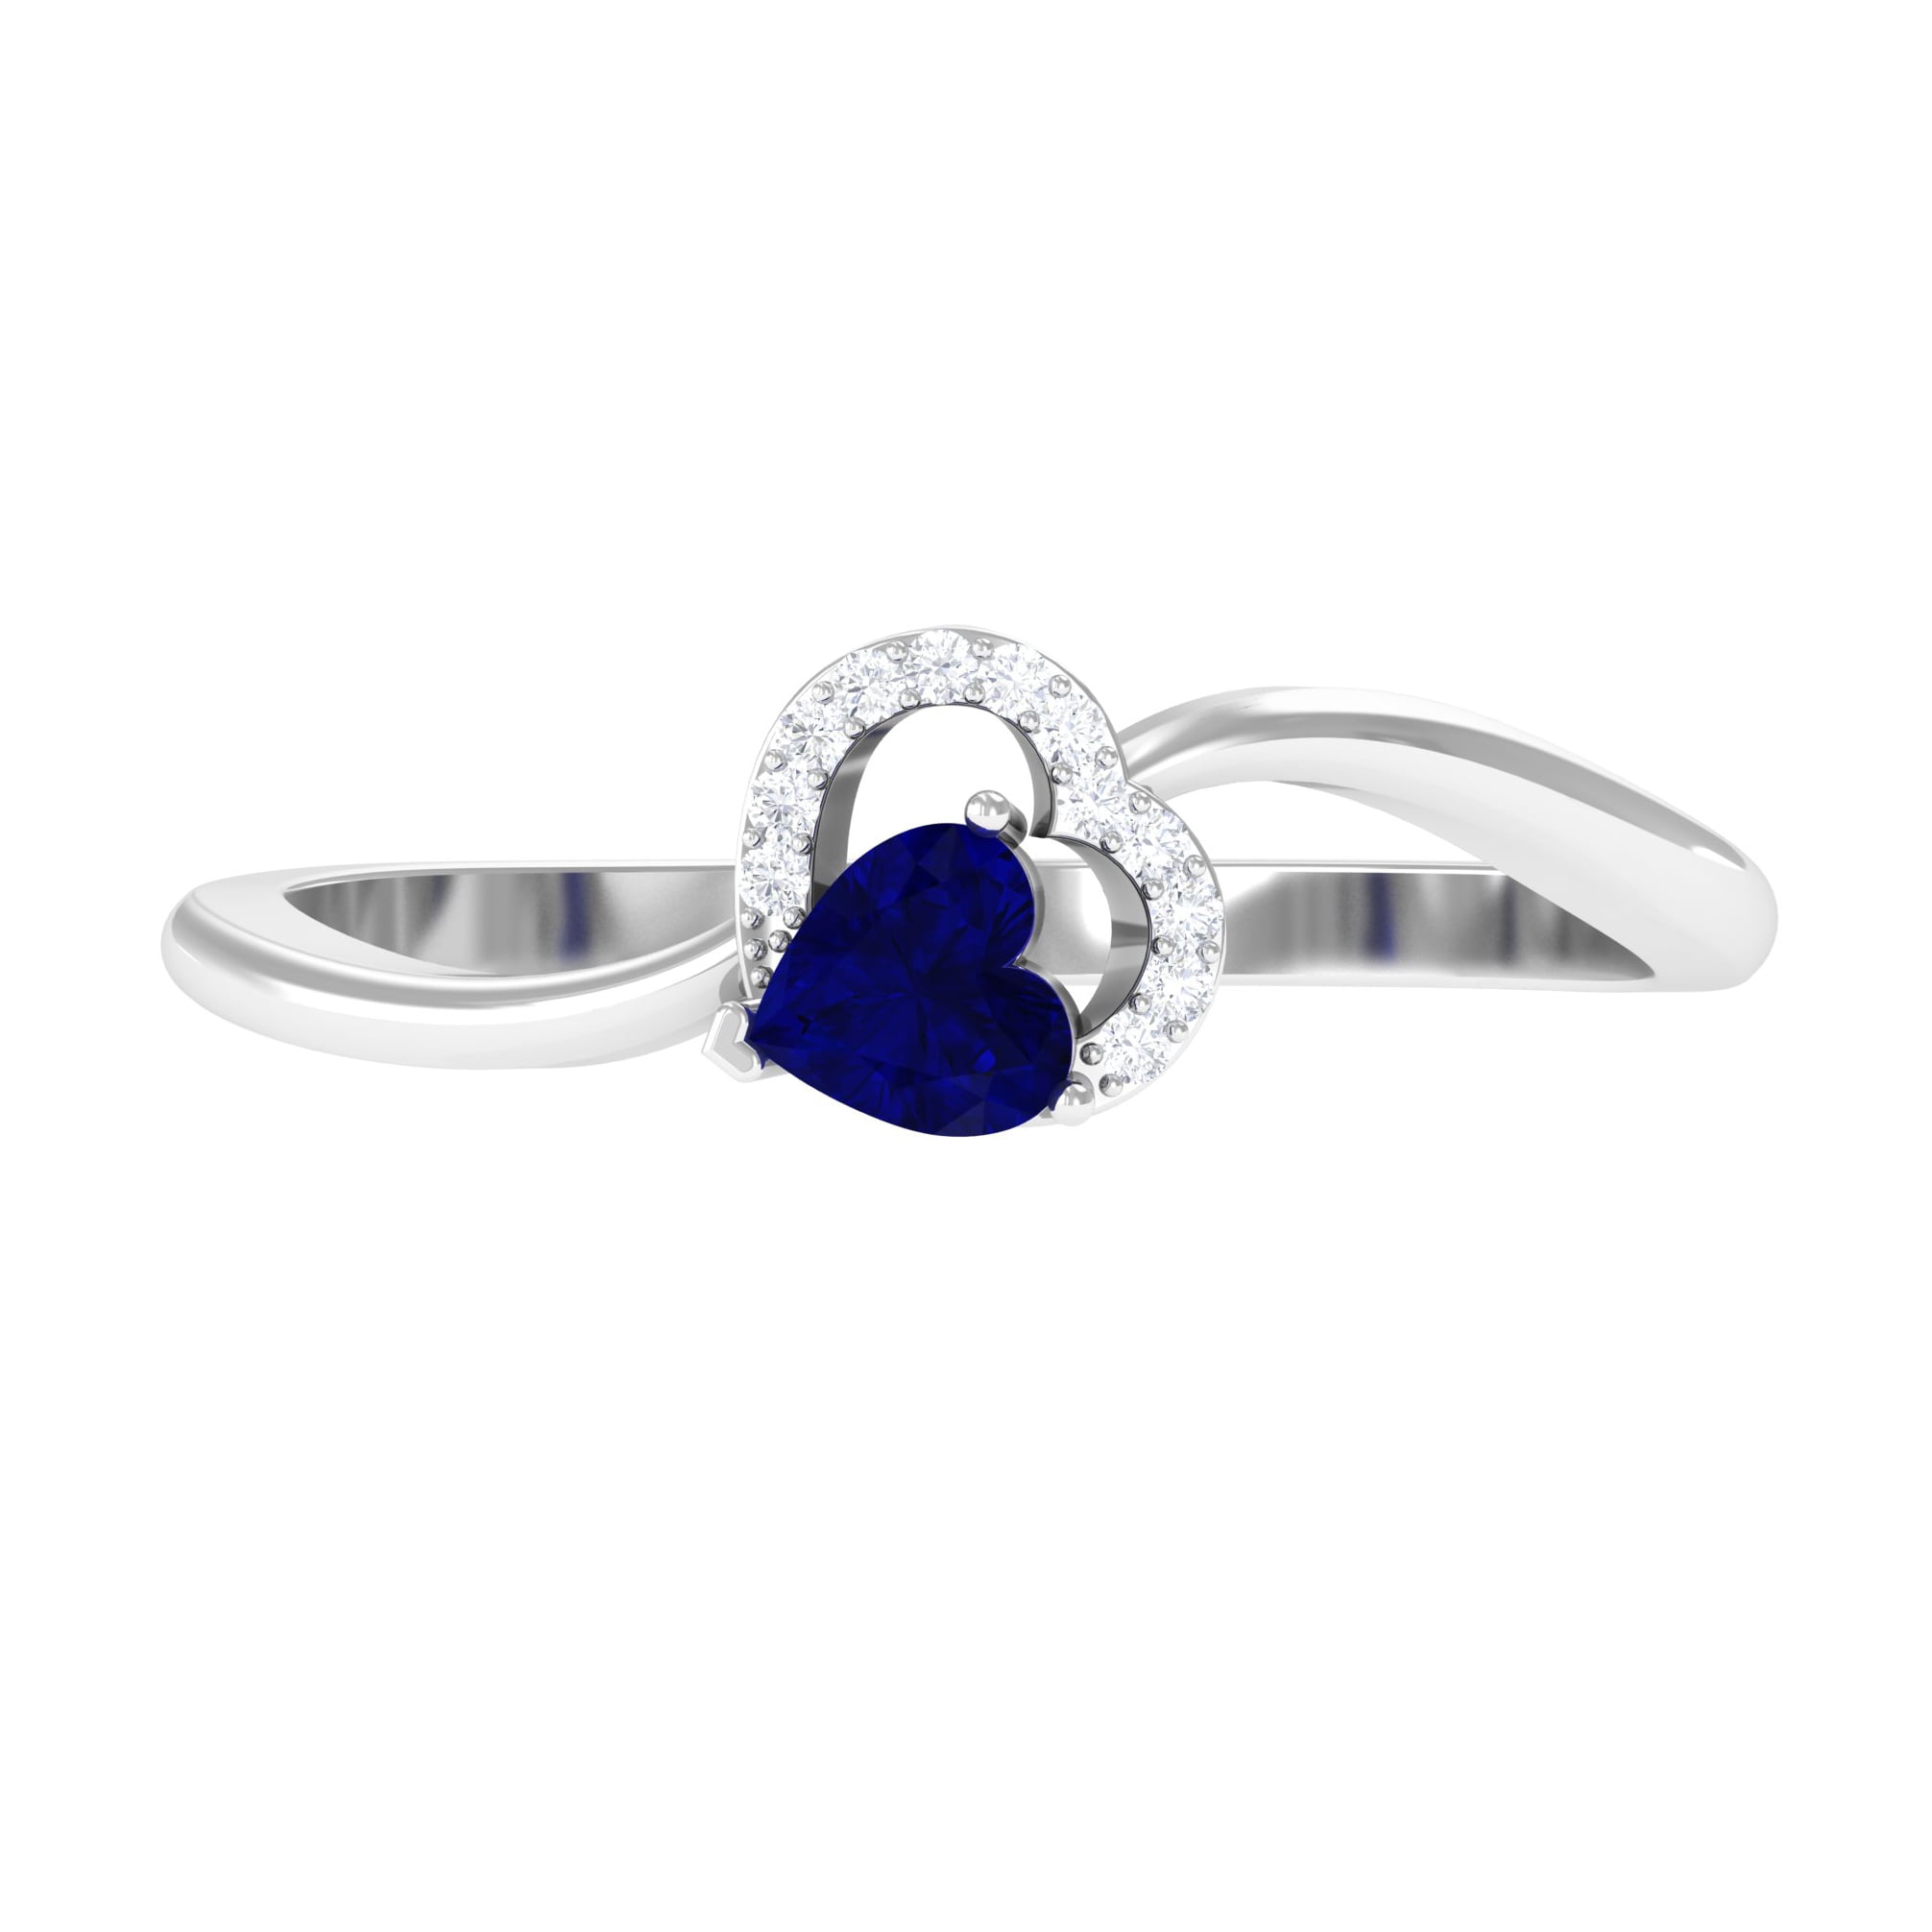 Hallmark Fine Jewelry Follow Your Heart Ring in Sterling Silver with C